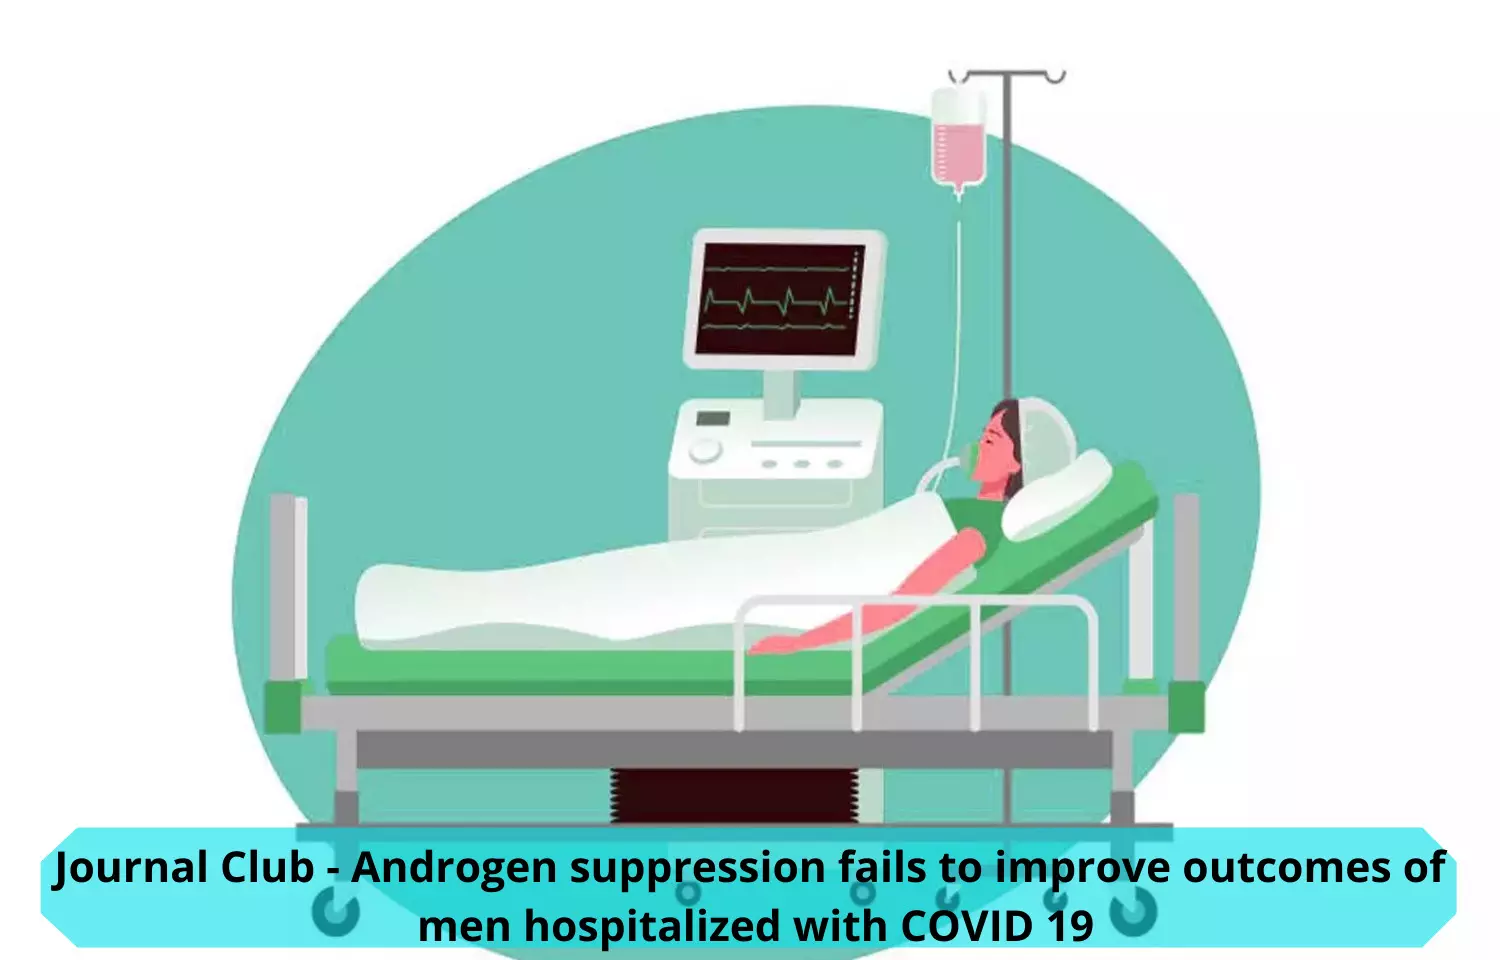 Journal Club - Androgen suppression fails to improve outcomes of men hospitalized with COVID 19